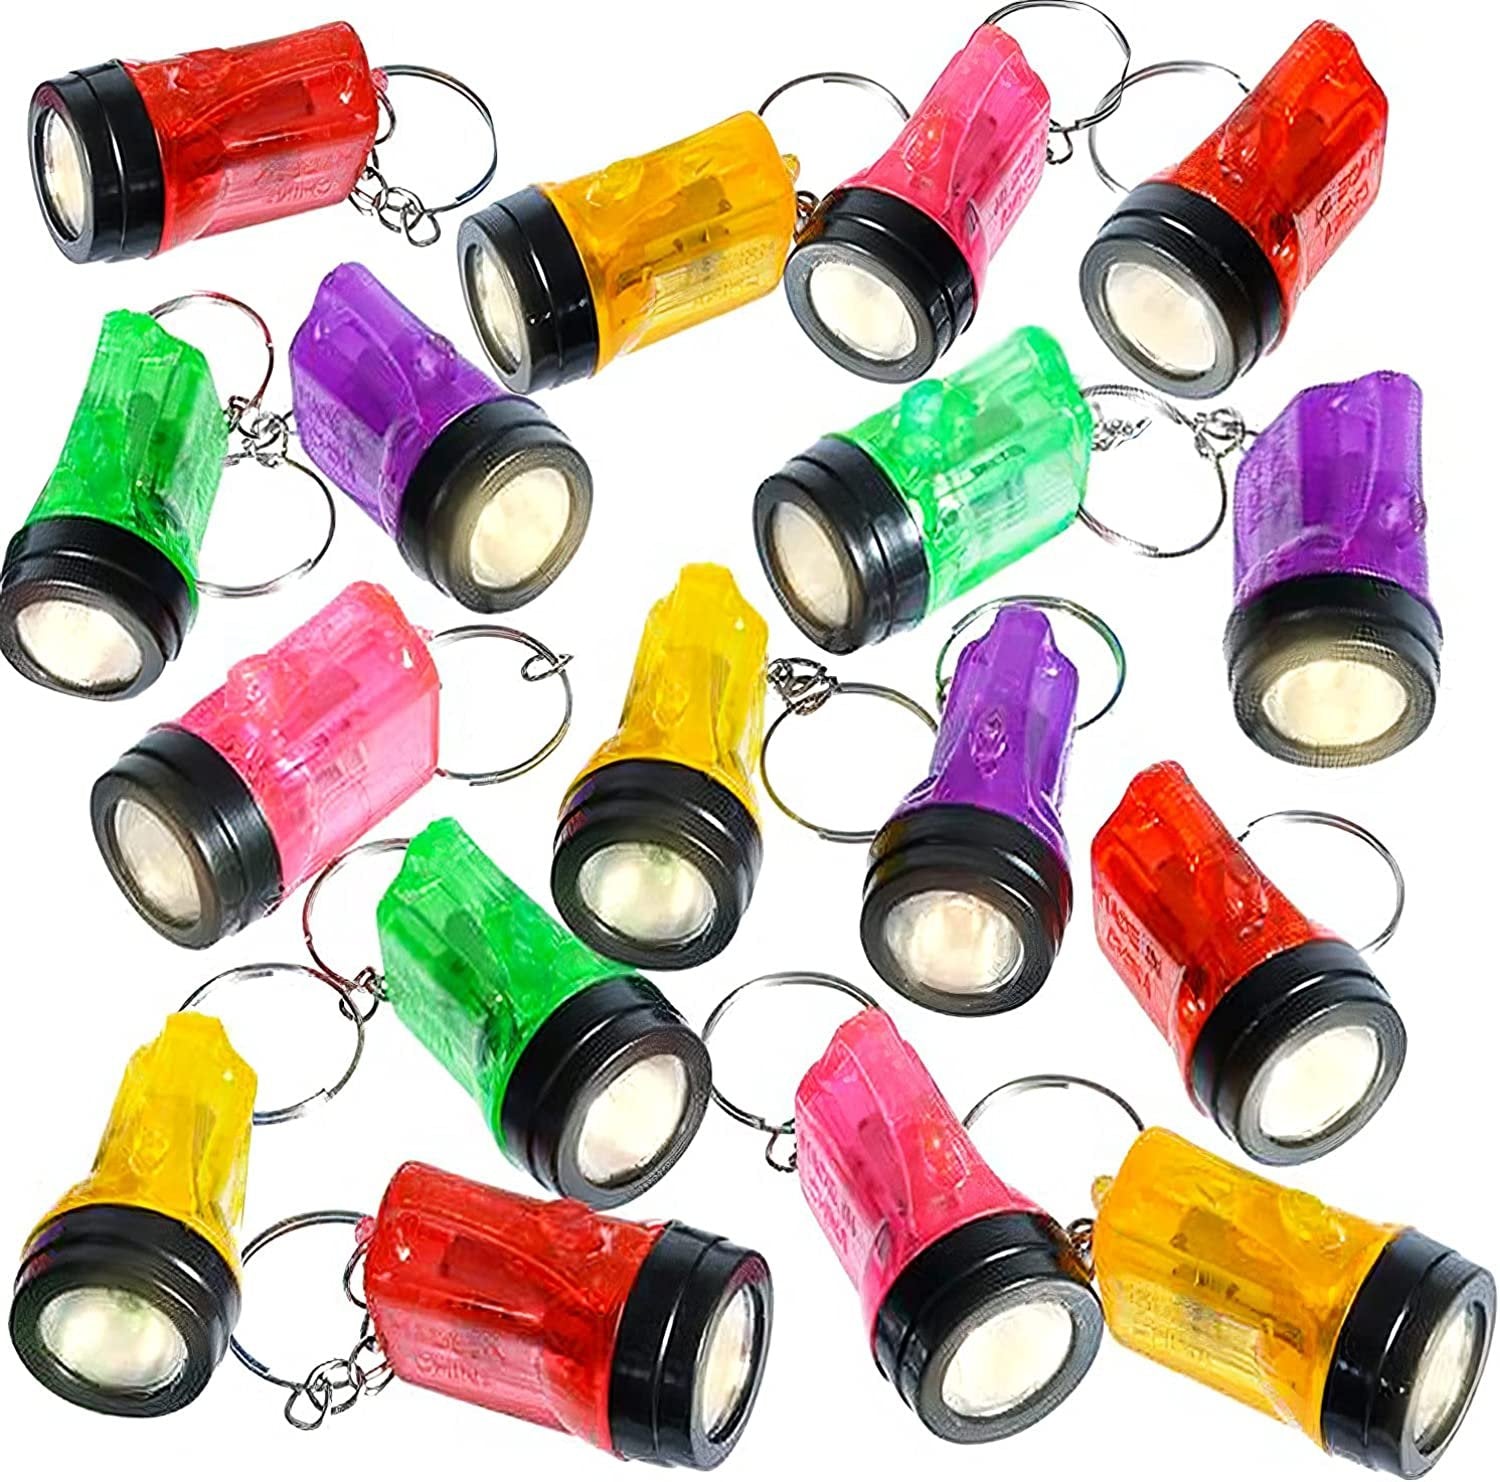 Mini Flashlight Keychains, Pack of 24, LED Key Chains for Kids in Assorted Colors, 1.5" Durable Plastic Keyholders, Birthday Party Favors, Goodie Bag Fillers